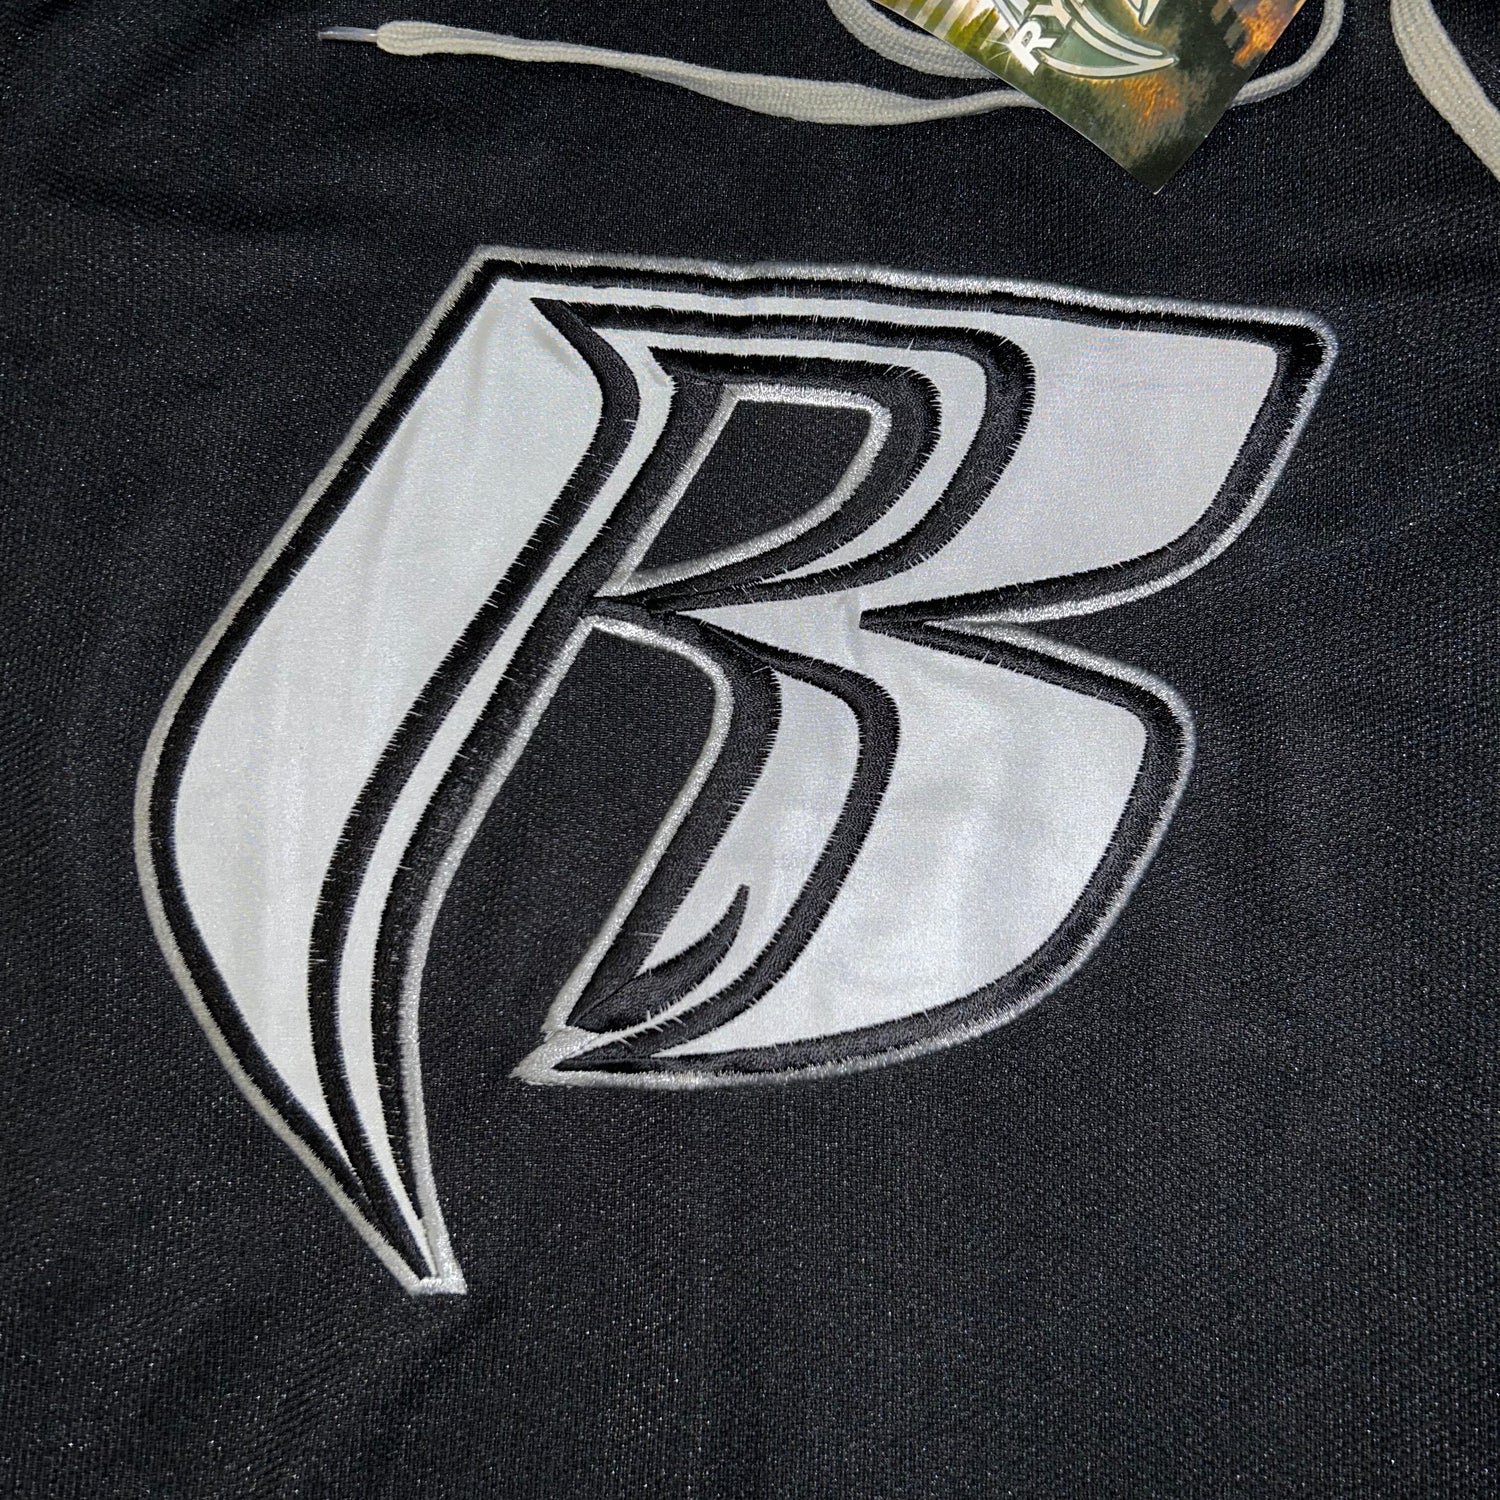 Ruff Ryders Vintage Jersey (S)